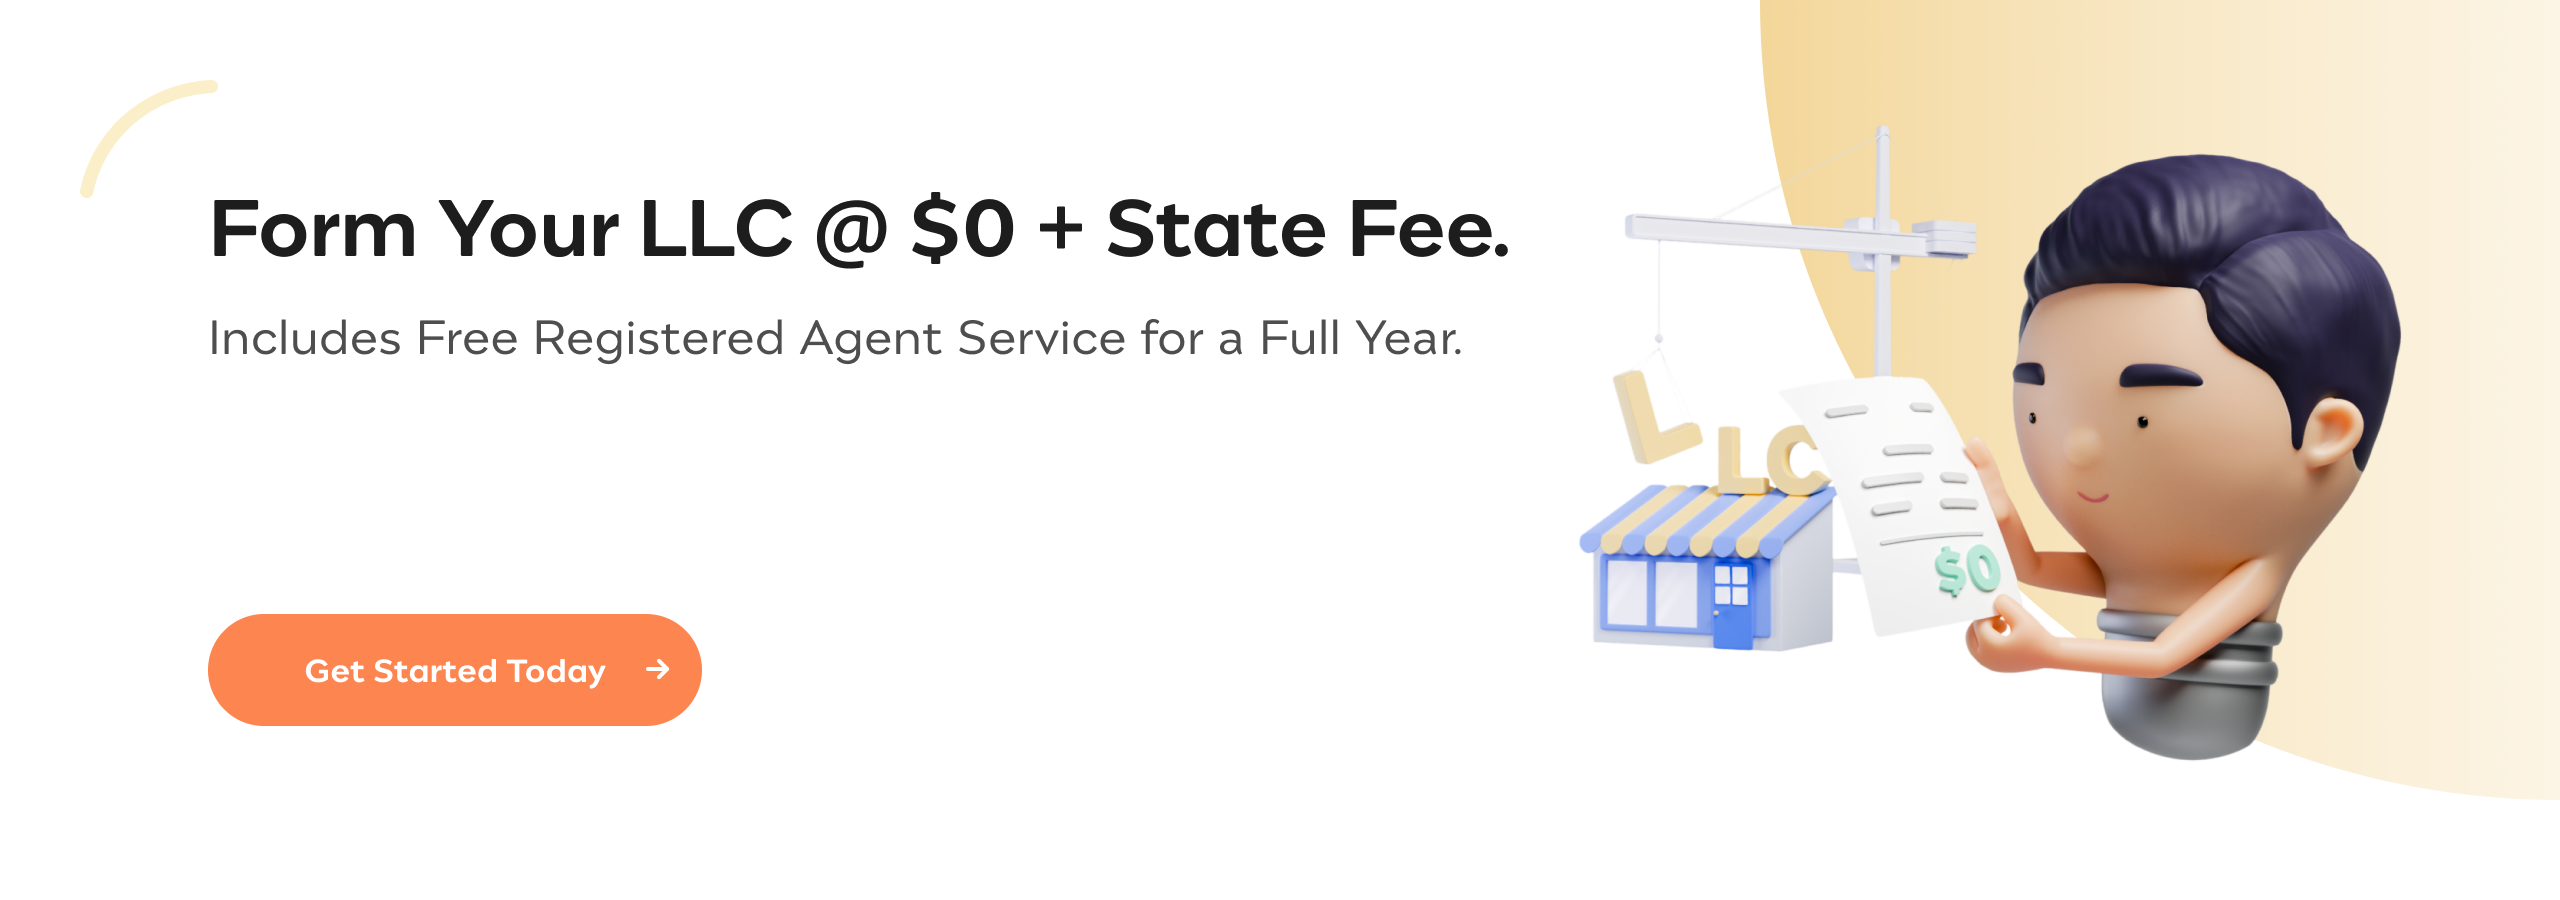 Form Your LLC @ $0 + State Fee. Includes Free Registered Agent Service for a Full Year.